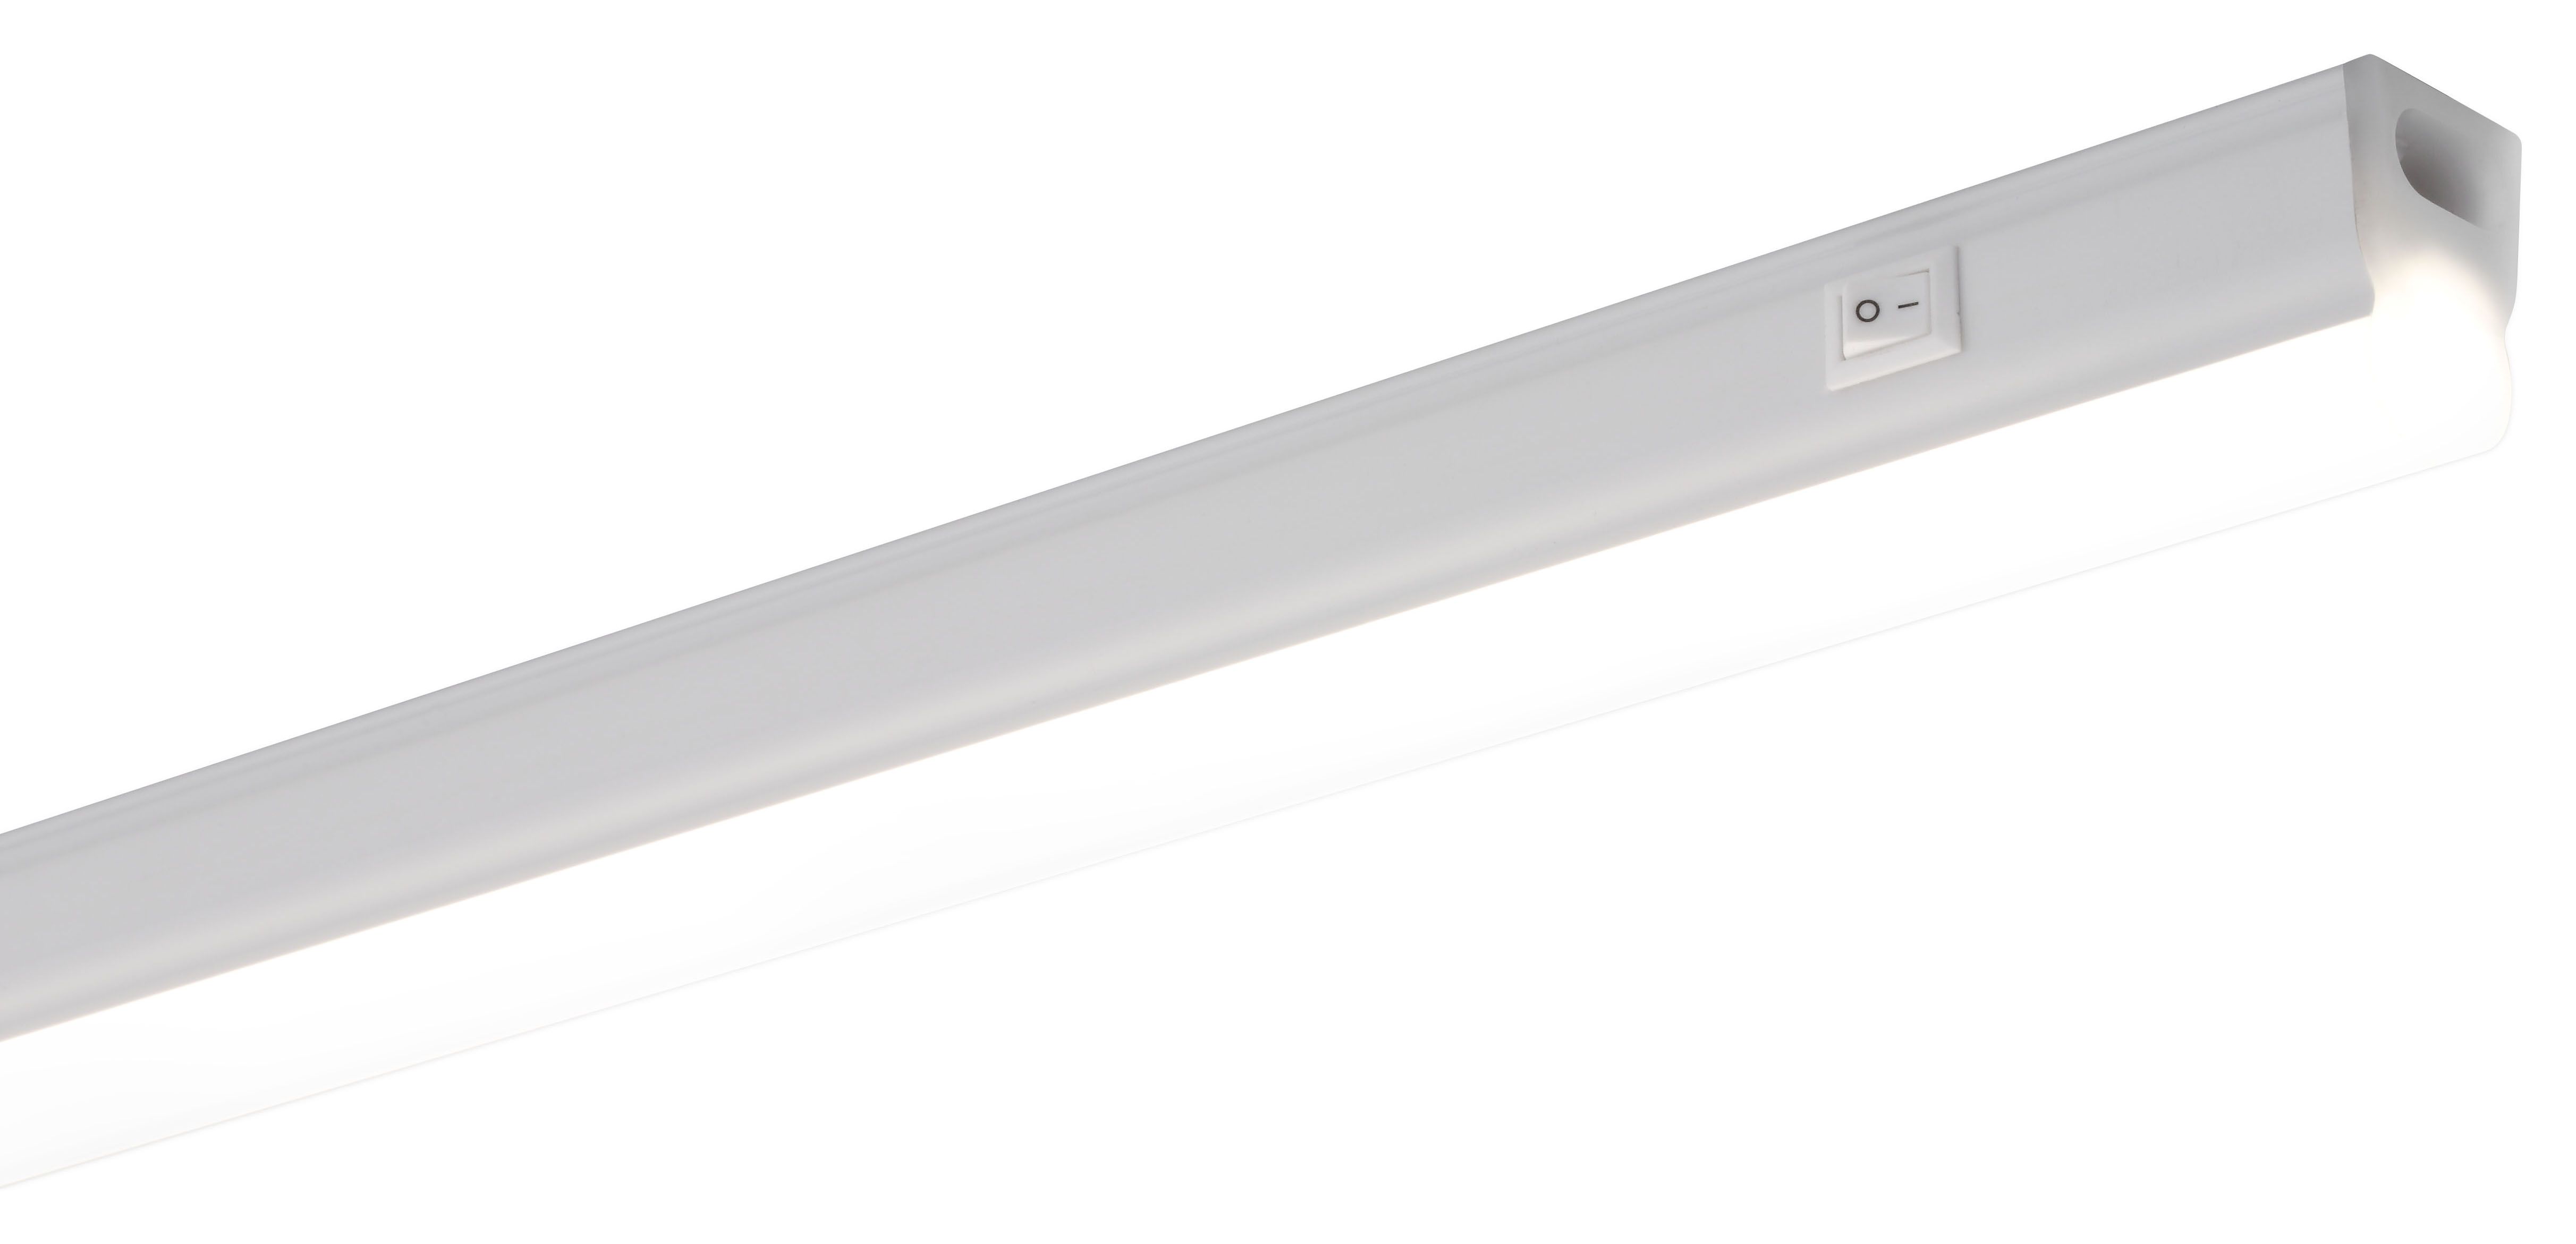 Image of Sylvania LED Pipe L900 High Output Nw T5 Replacement Batten Light